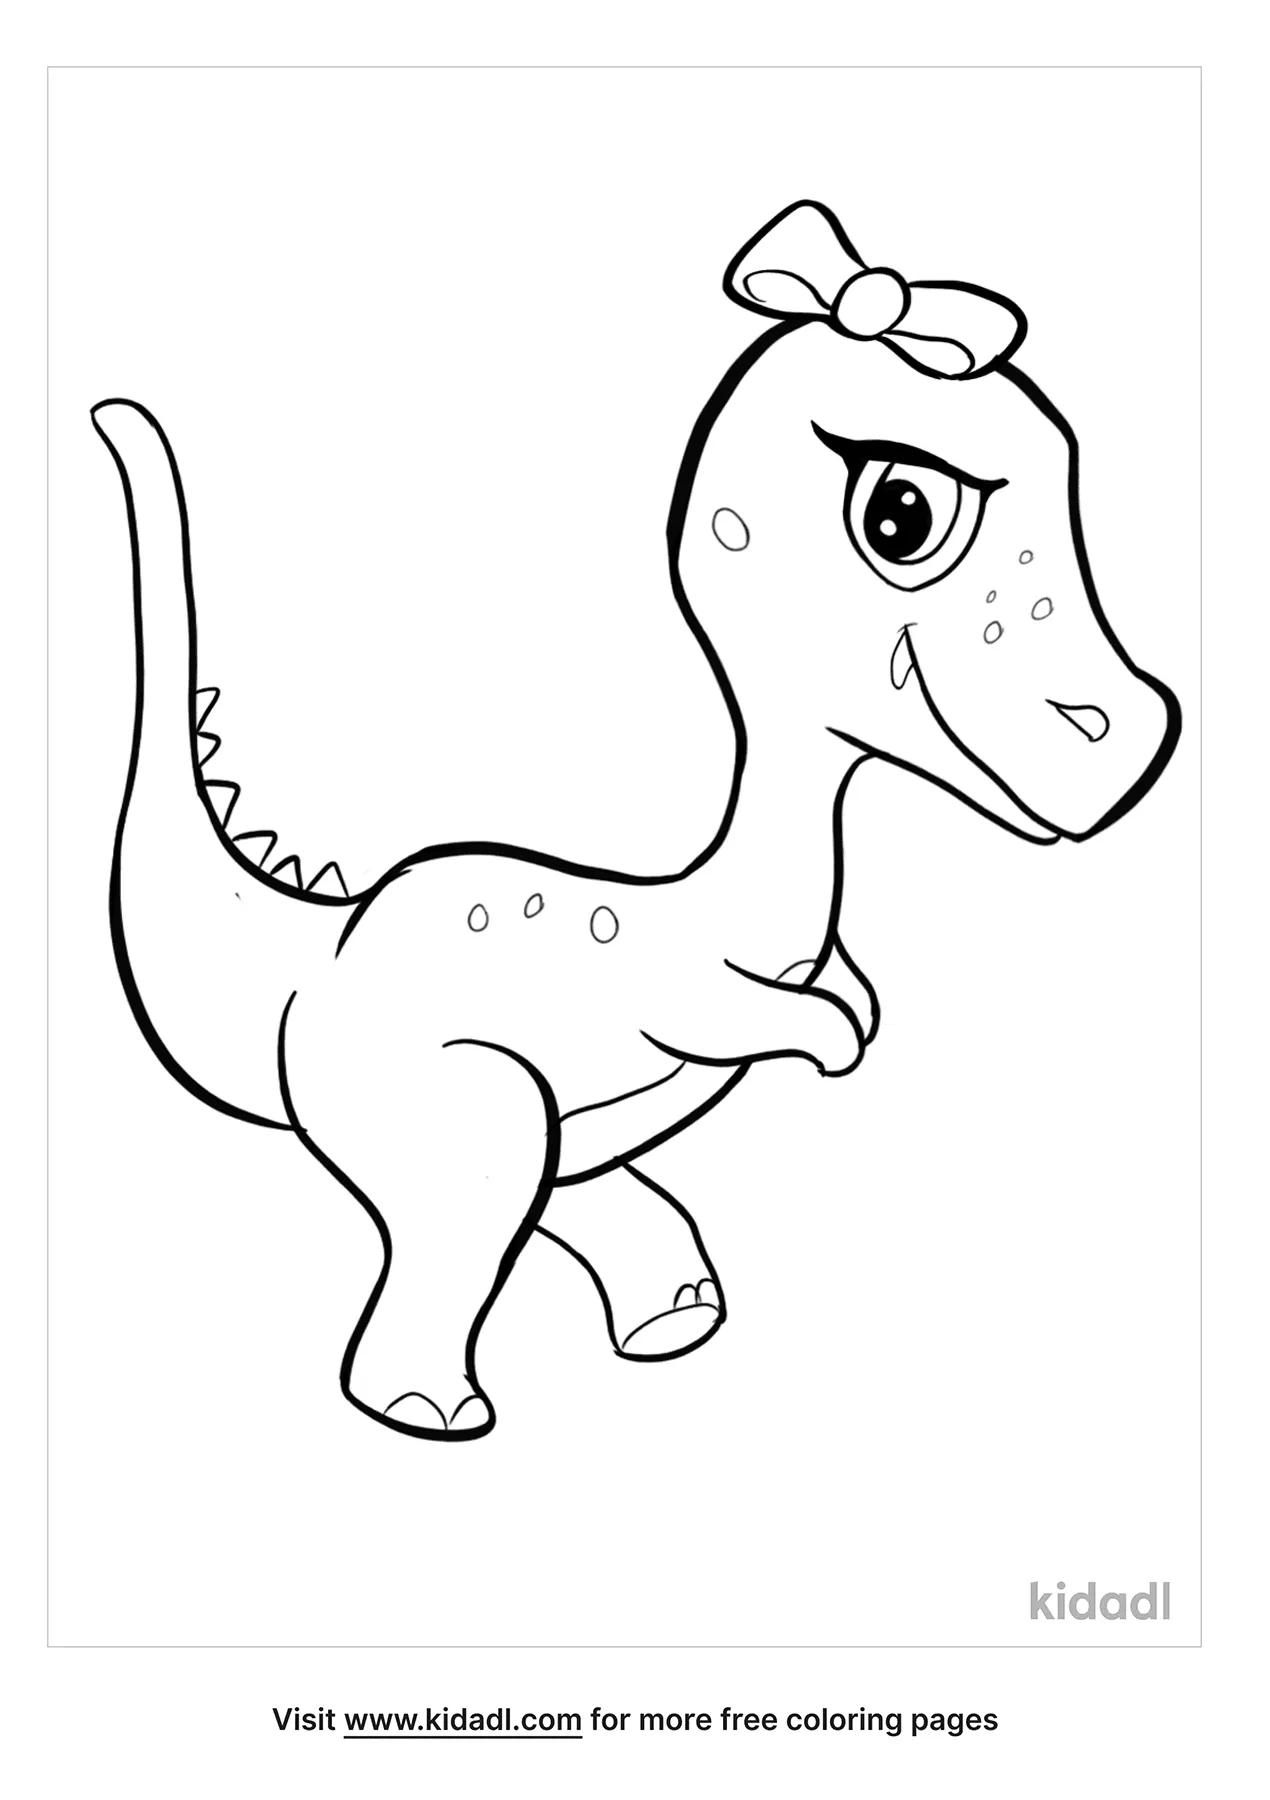 T Rex Coloring Pages   Free Dinosaurs Coloring Pages   Kidadl